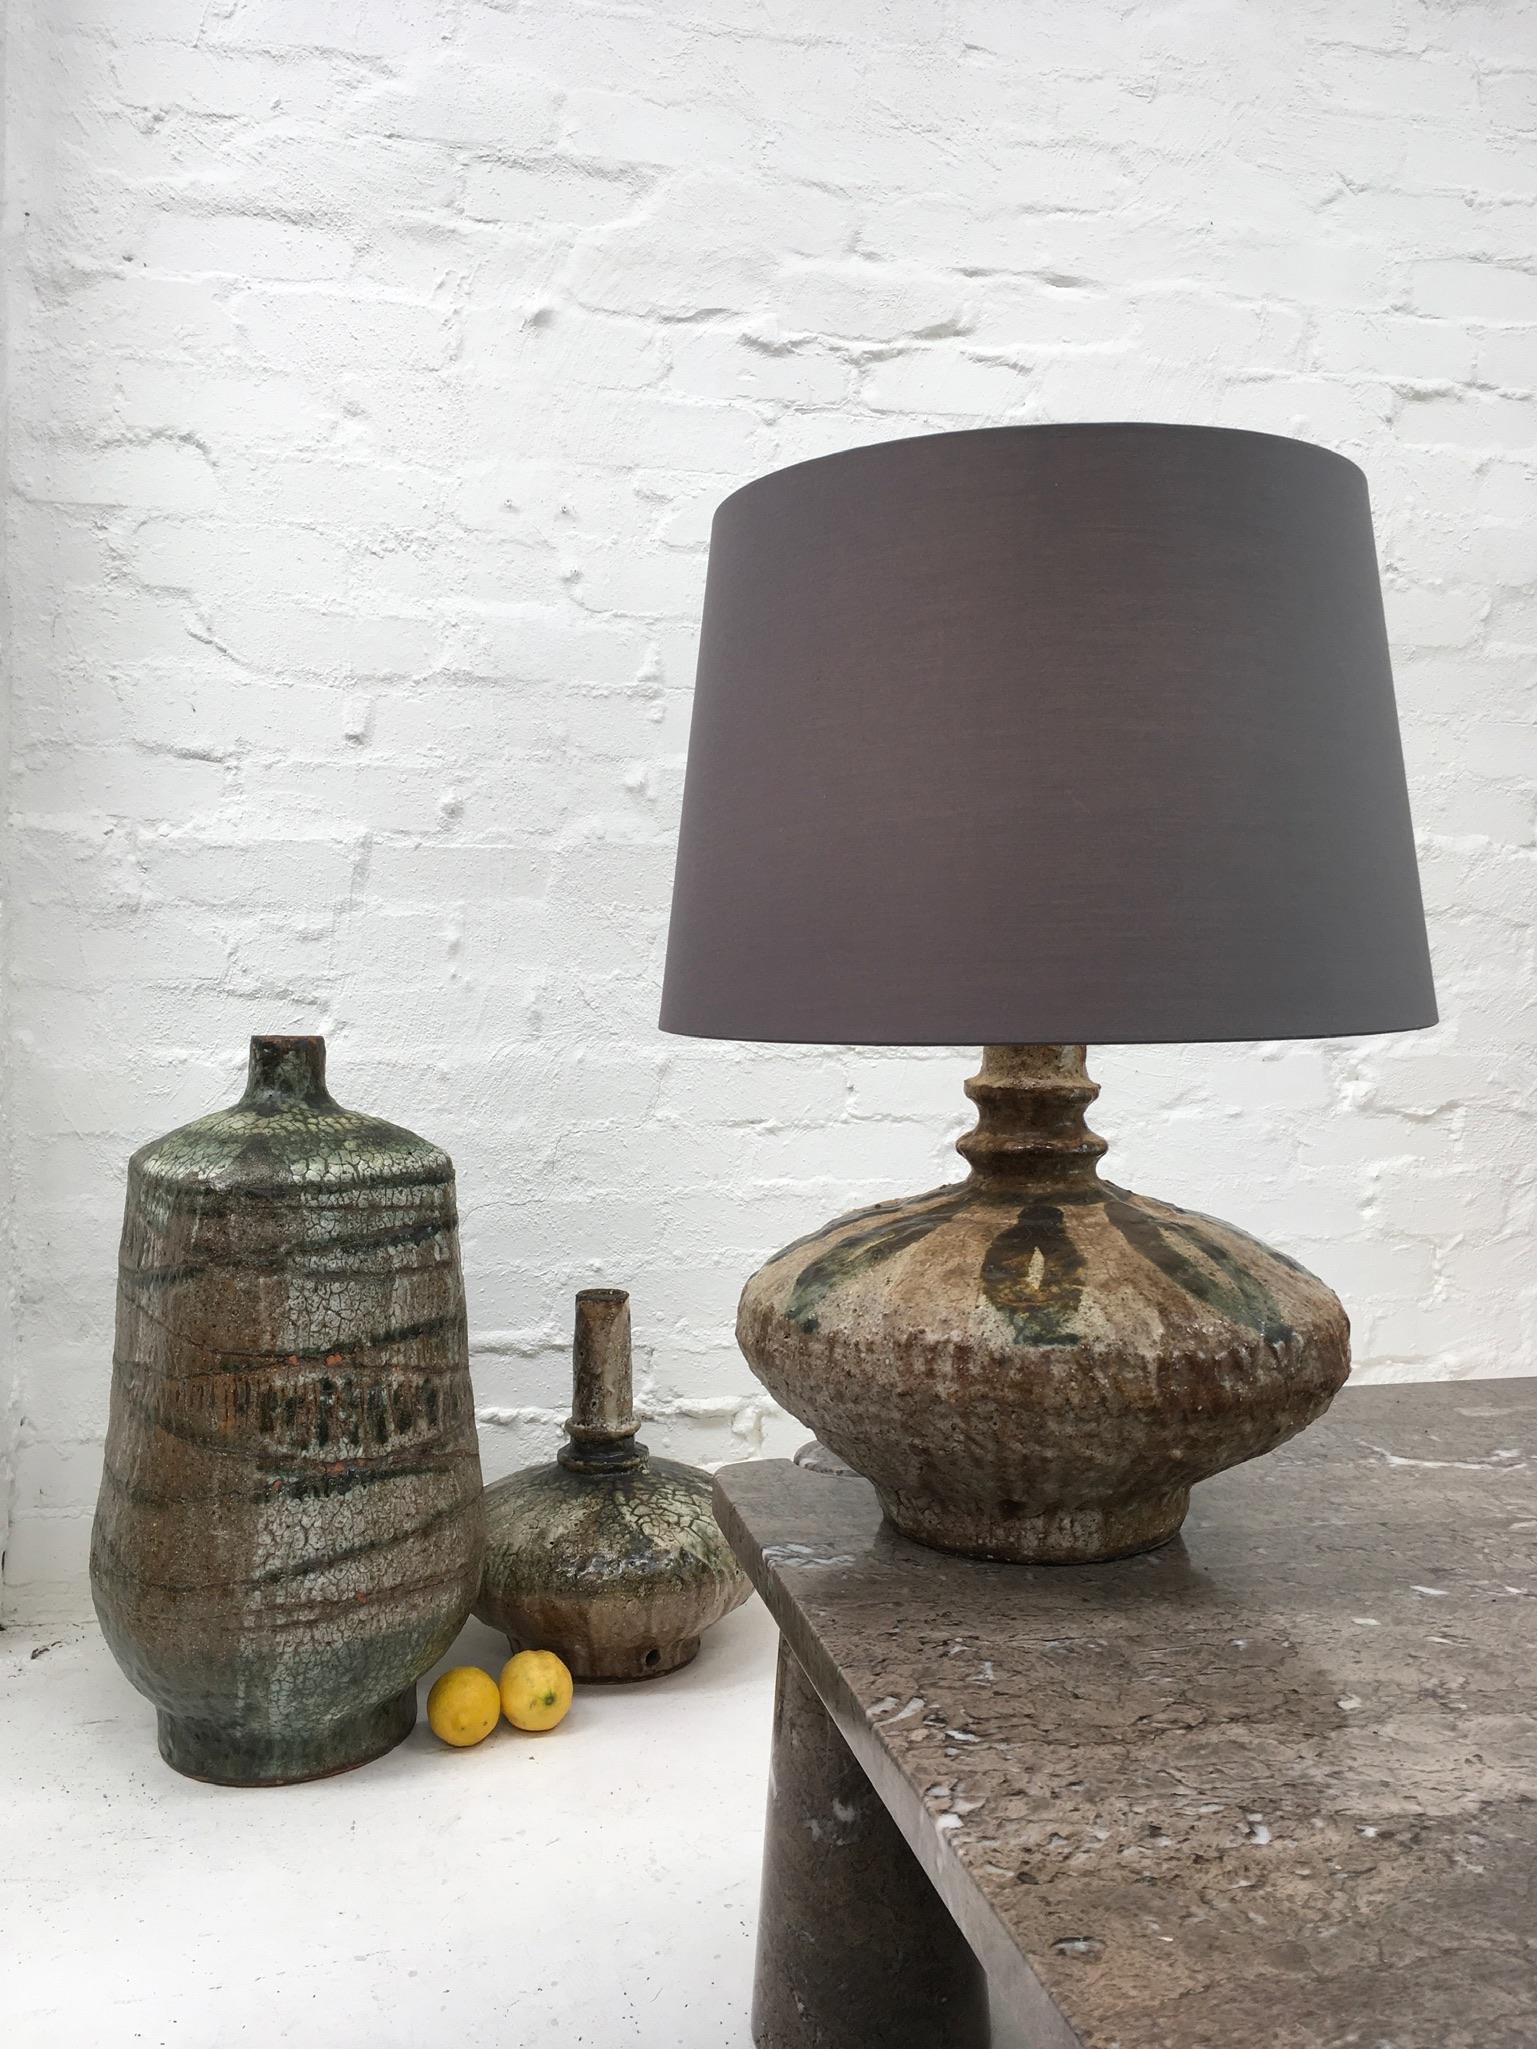 Large and wonderfully shaped earthenware lamp is fully wired, tested and tagged safe for use. It’s a coil pot construction in the style of Dan Arbeid. The wide shape and mineral rustic glaze make this a very attractive lamp.

Based on ancient Middle